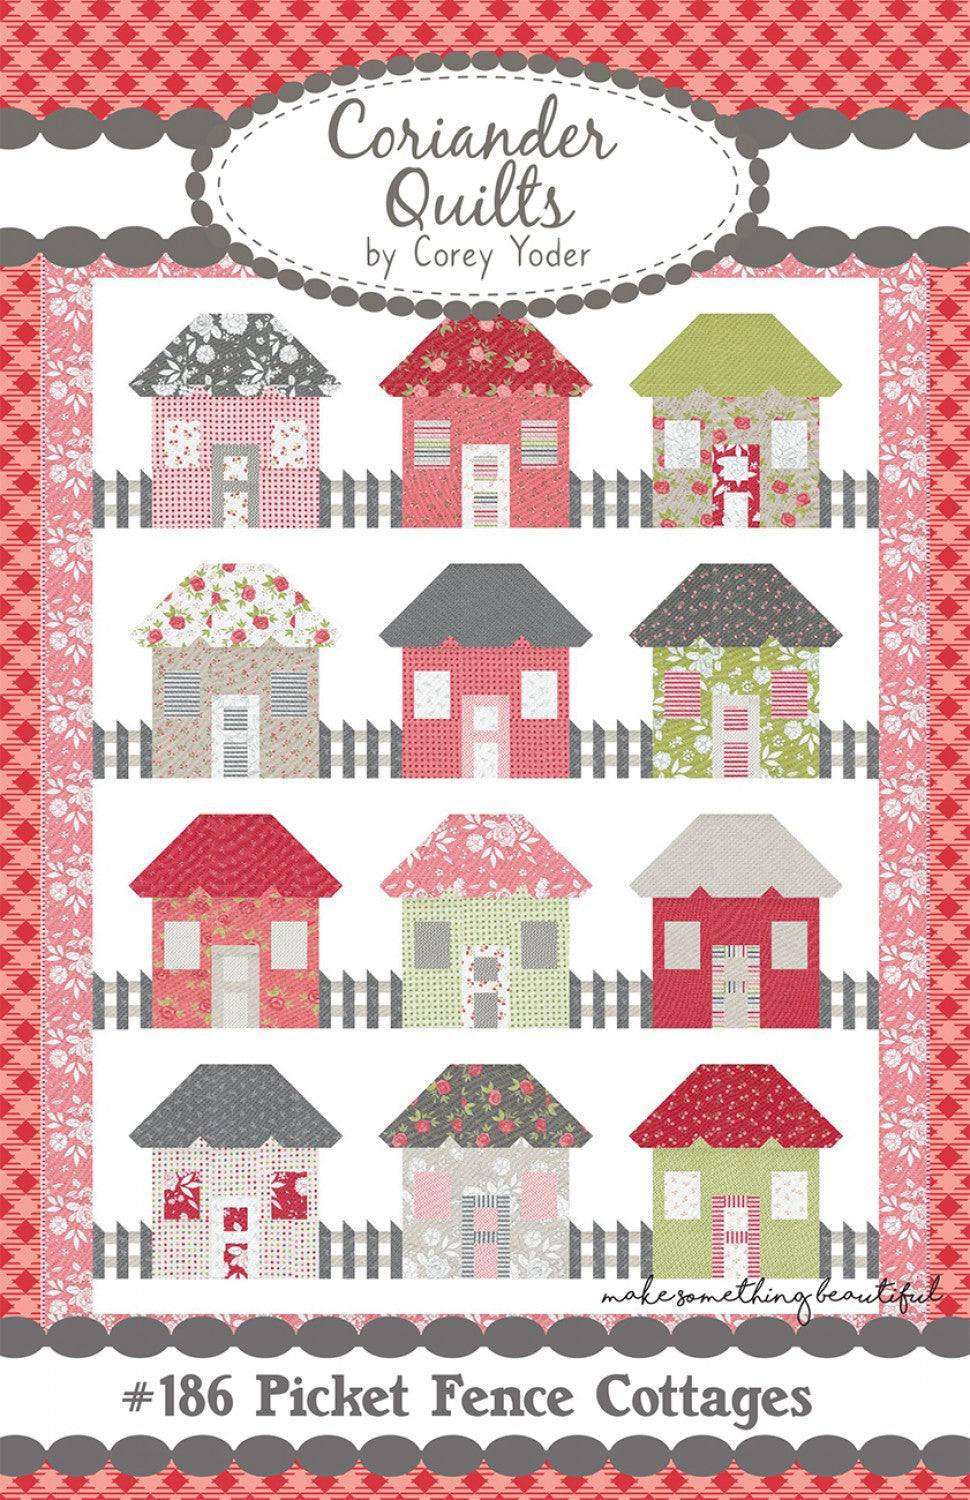 Picket Fence Cottages Quilt Pattern by Corey Yoder of Coriander Quilts